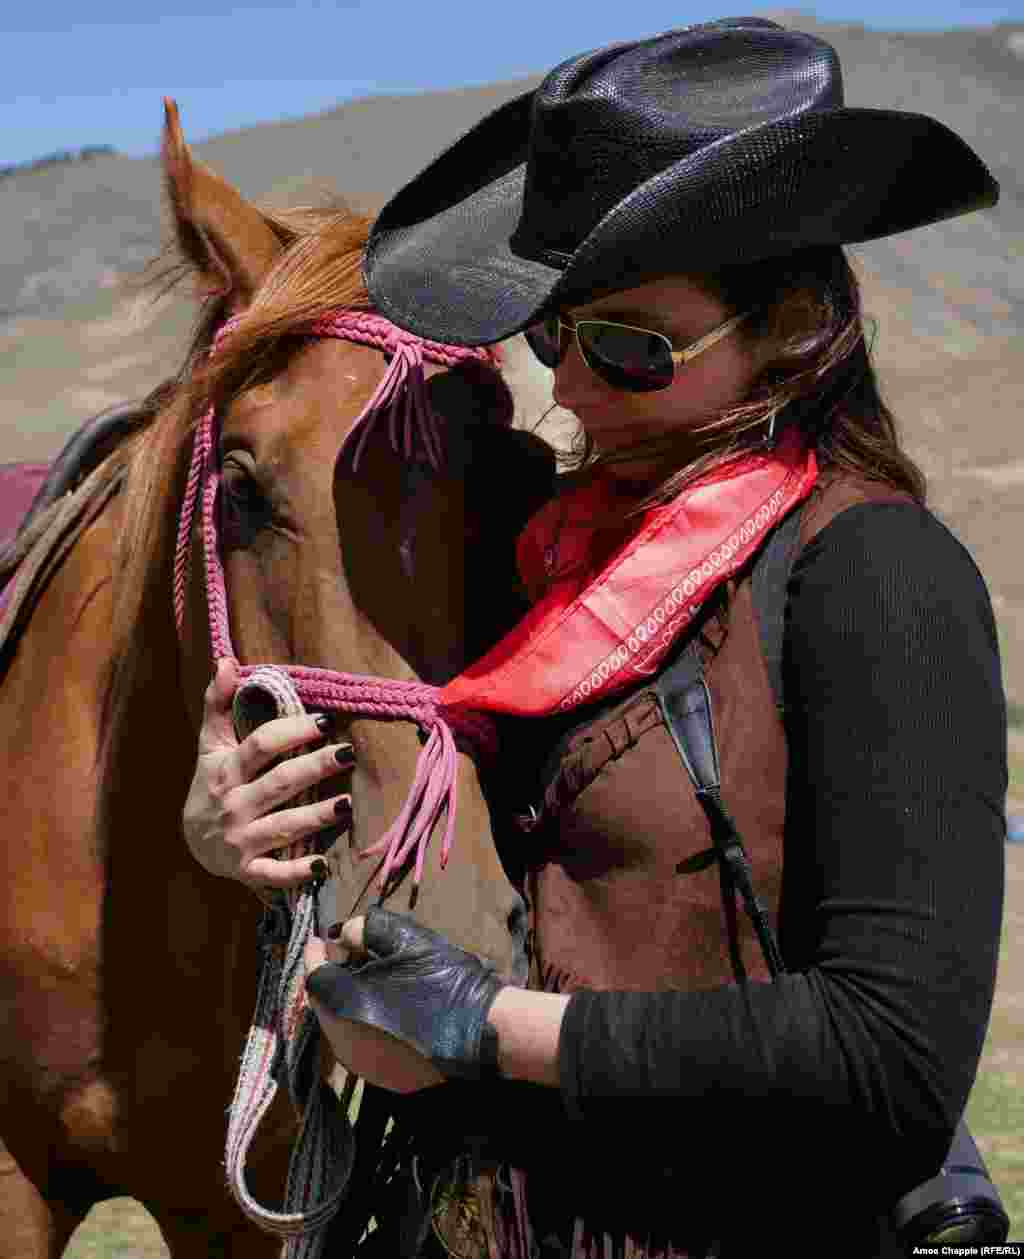 Texan Susannah Winfield comforts her horse before the event. Winfield told RFE/RL there was some head scratching among the U.S. contingent over what exactly America&#39;s traditional dress was: &quot;I think a lot of [Kyrgyz] people thought we would compete in native American clothing, but we had to explain that we can&#39;t really do that, and we figured the cowboy look would be less controversial.&quot;